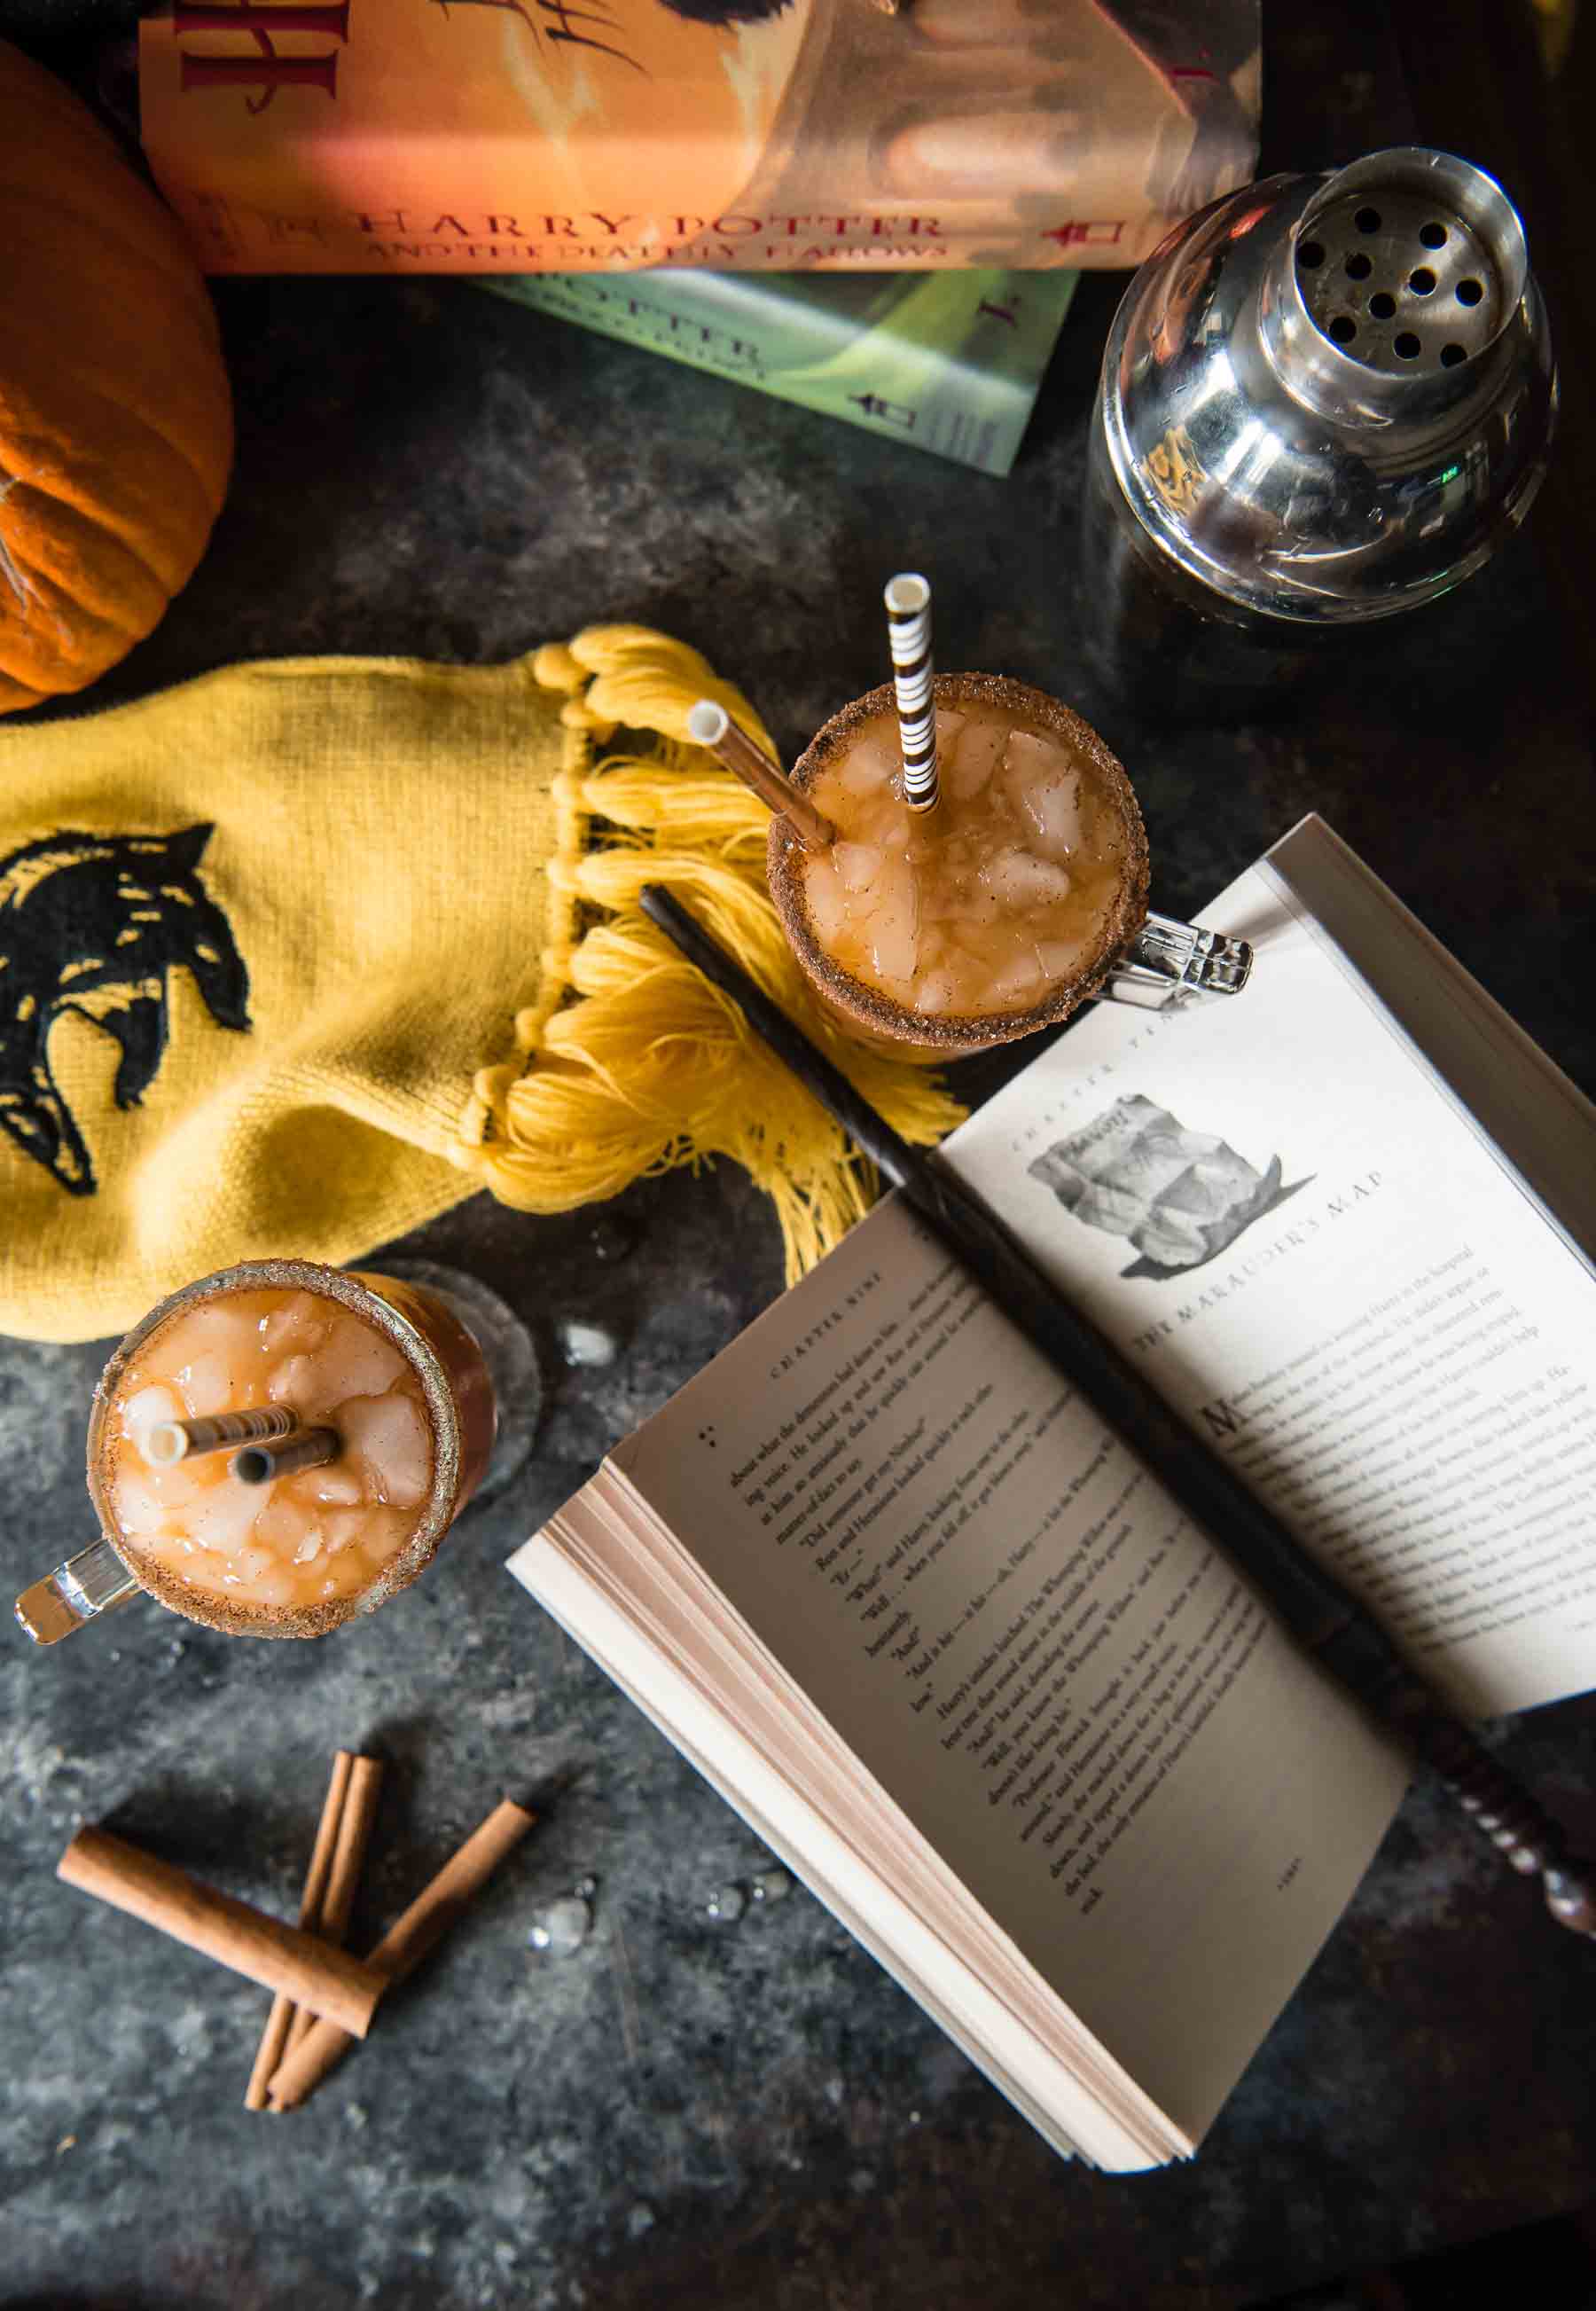 Who says adults can't enjoy Harry Potter?! This "Grown Up" Potter Pumpkin Juice cocktail spikes Hogsmeade's popular drink with bourbon whiskey, Slytherin style!